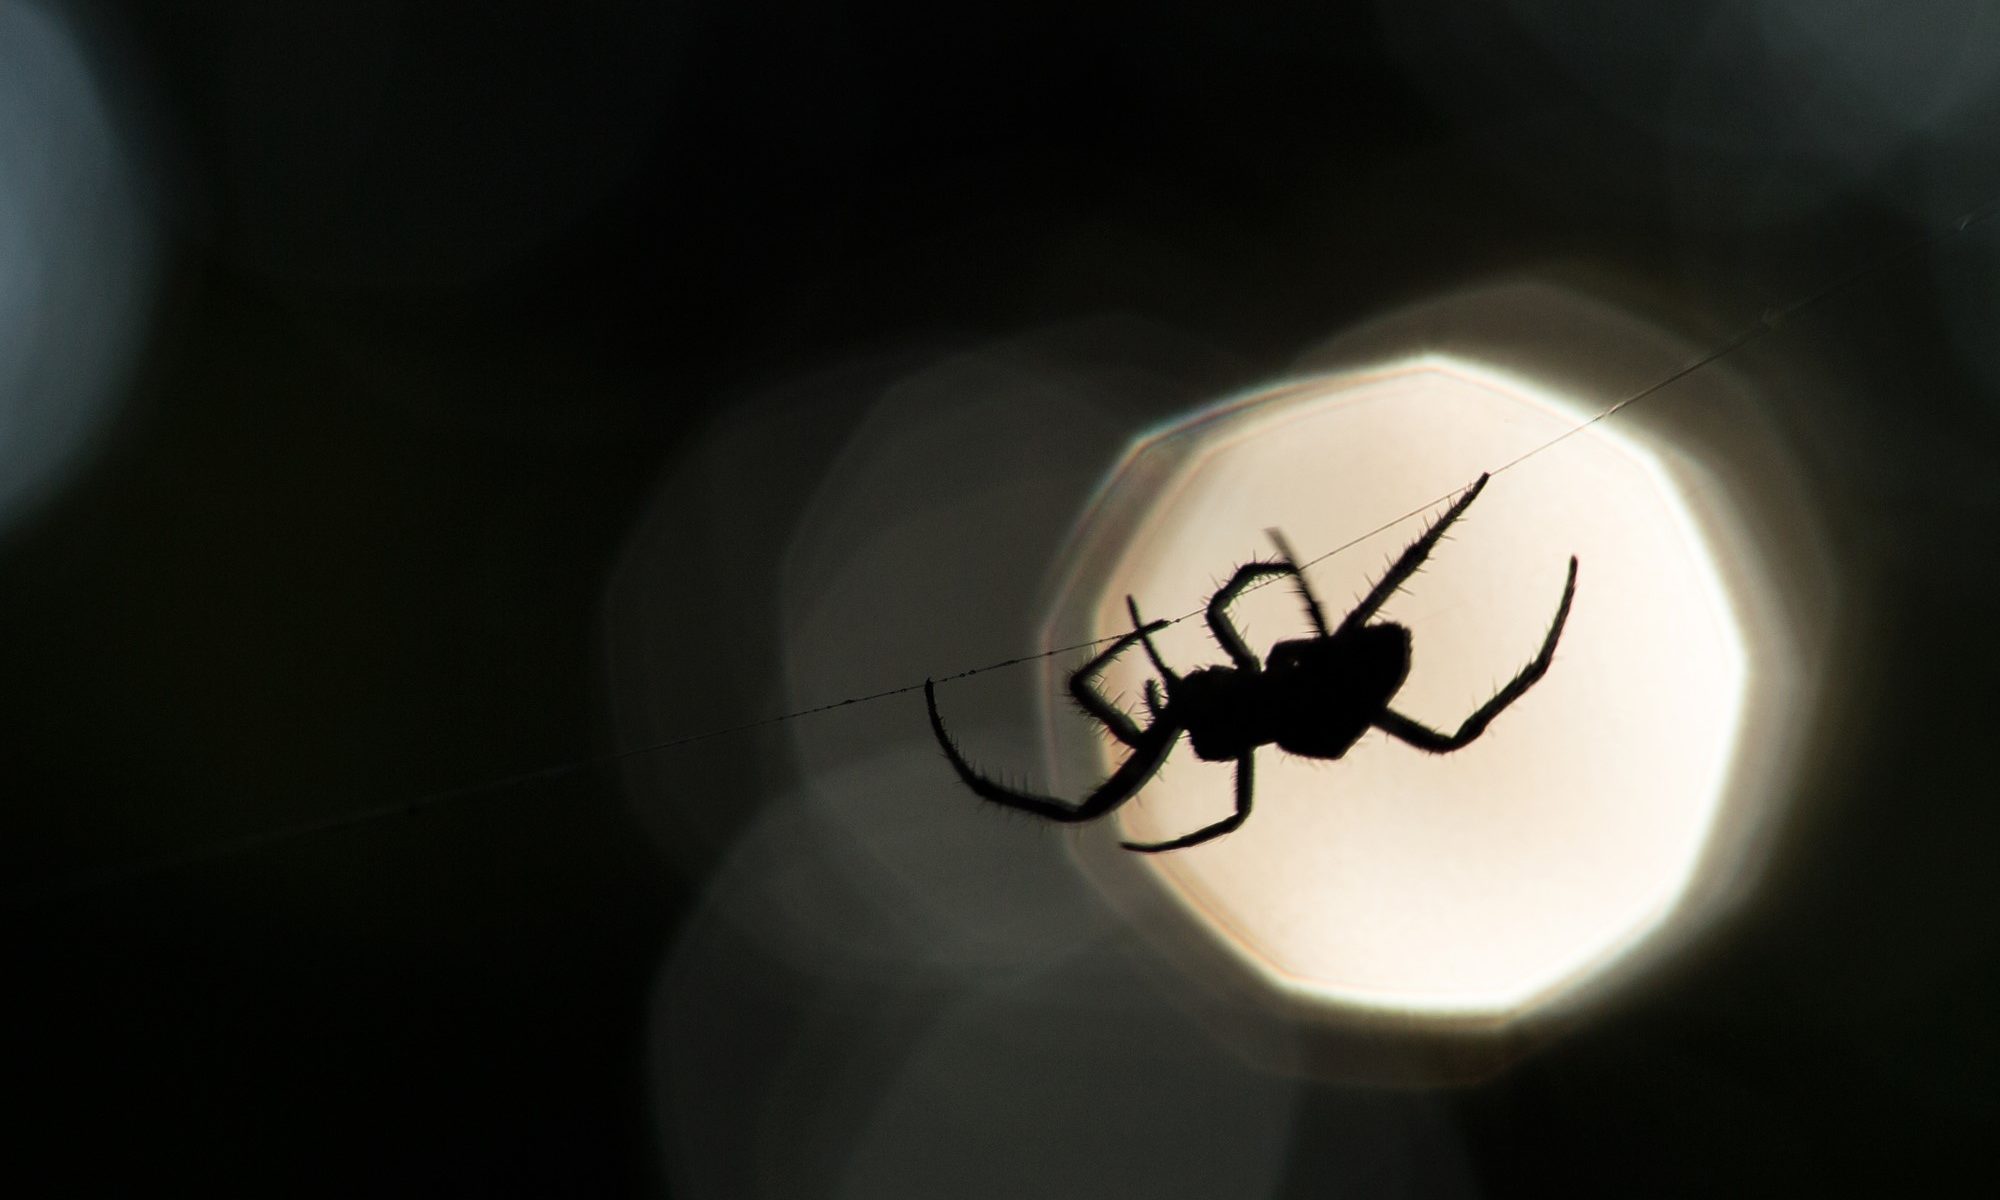 image of large spider silhouette at night